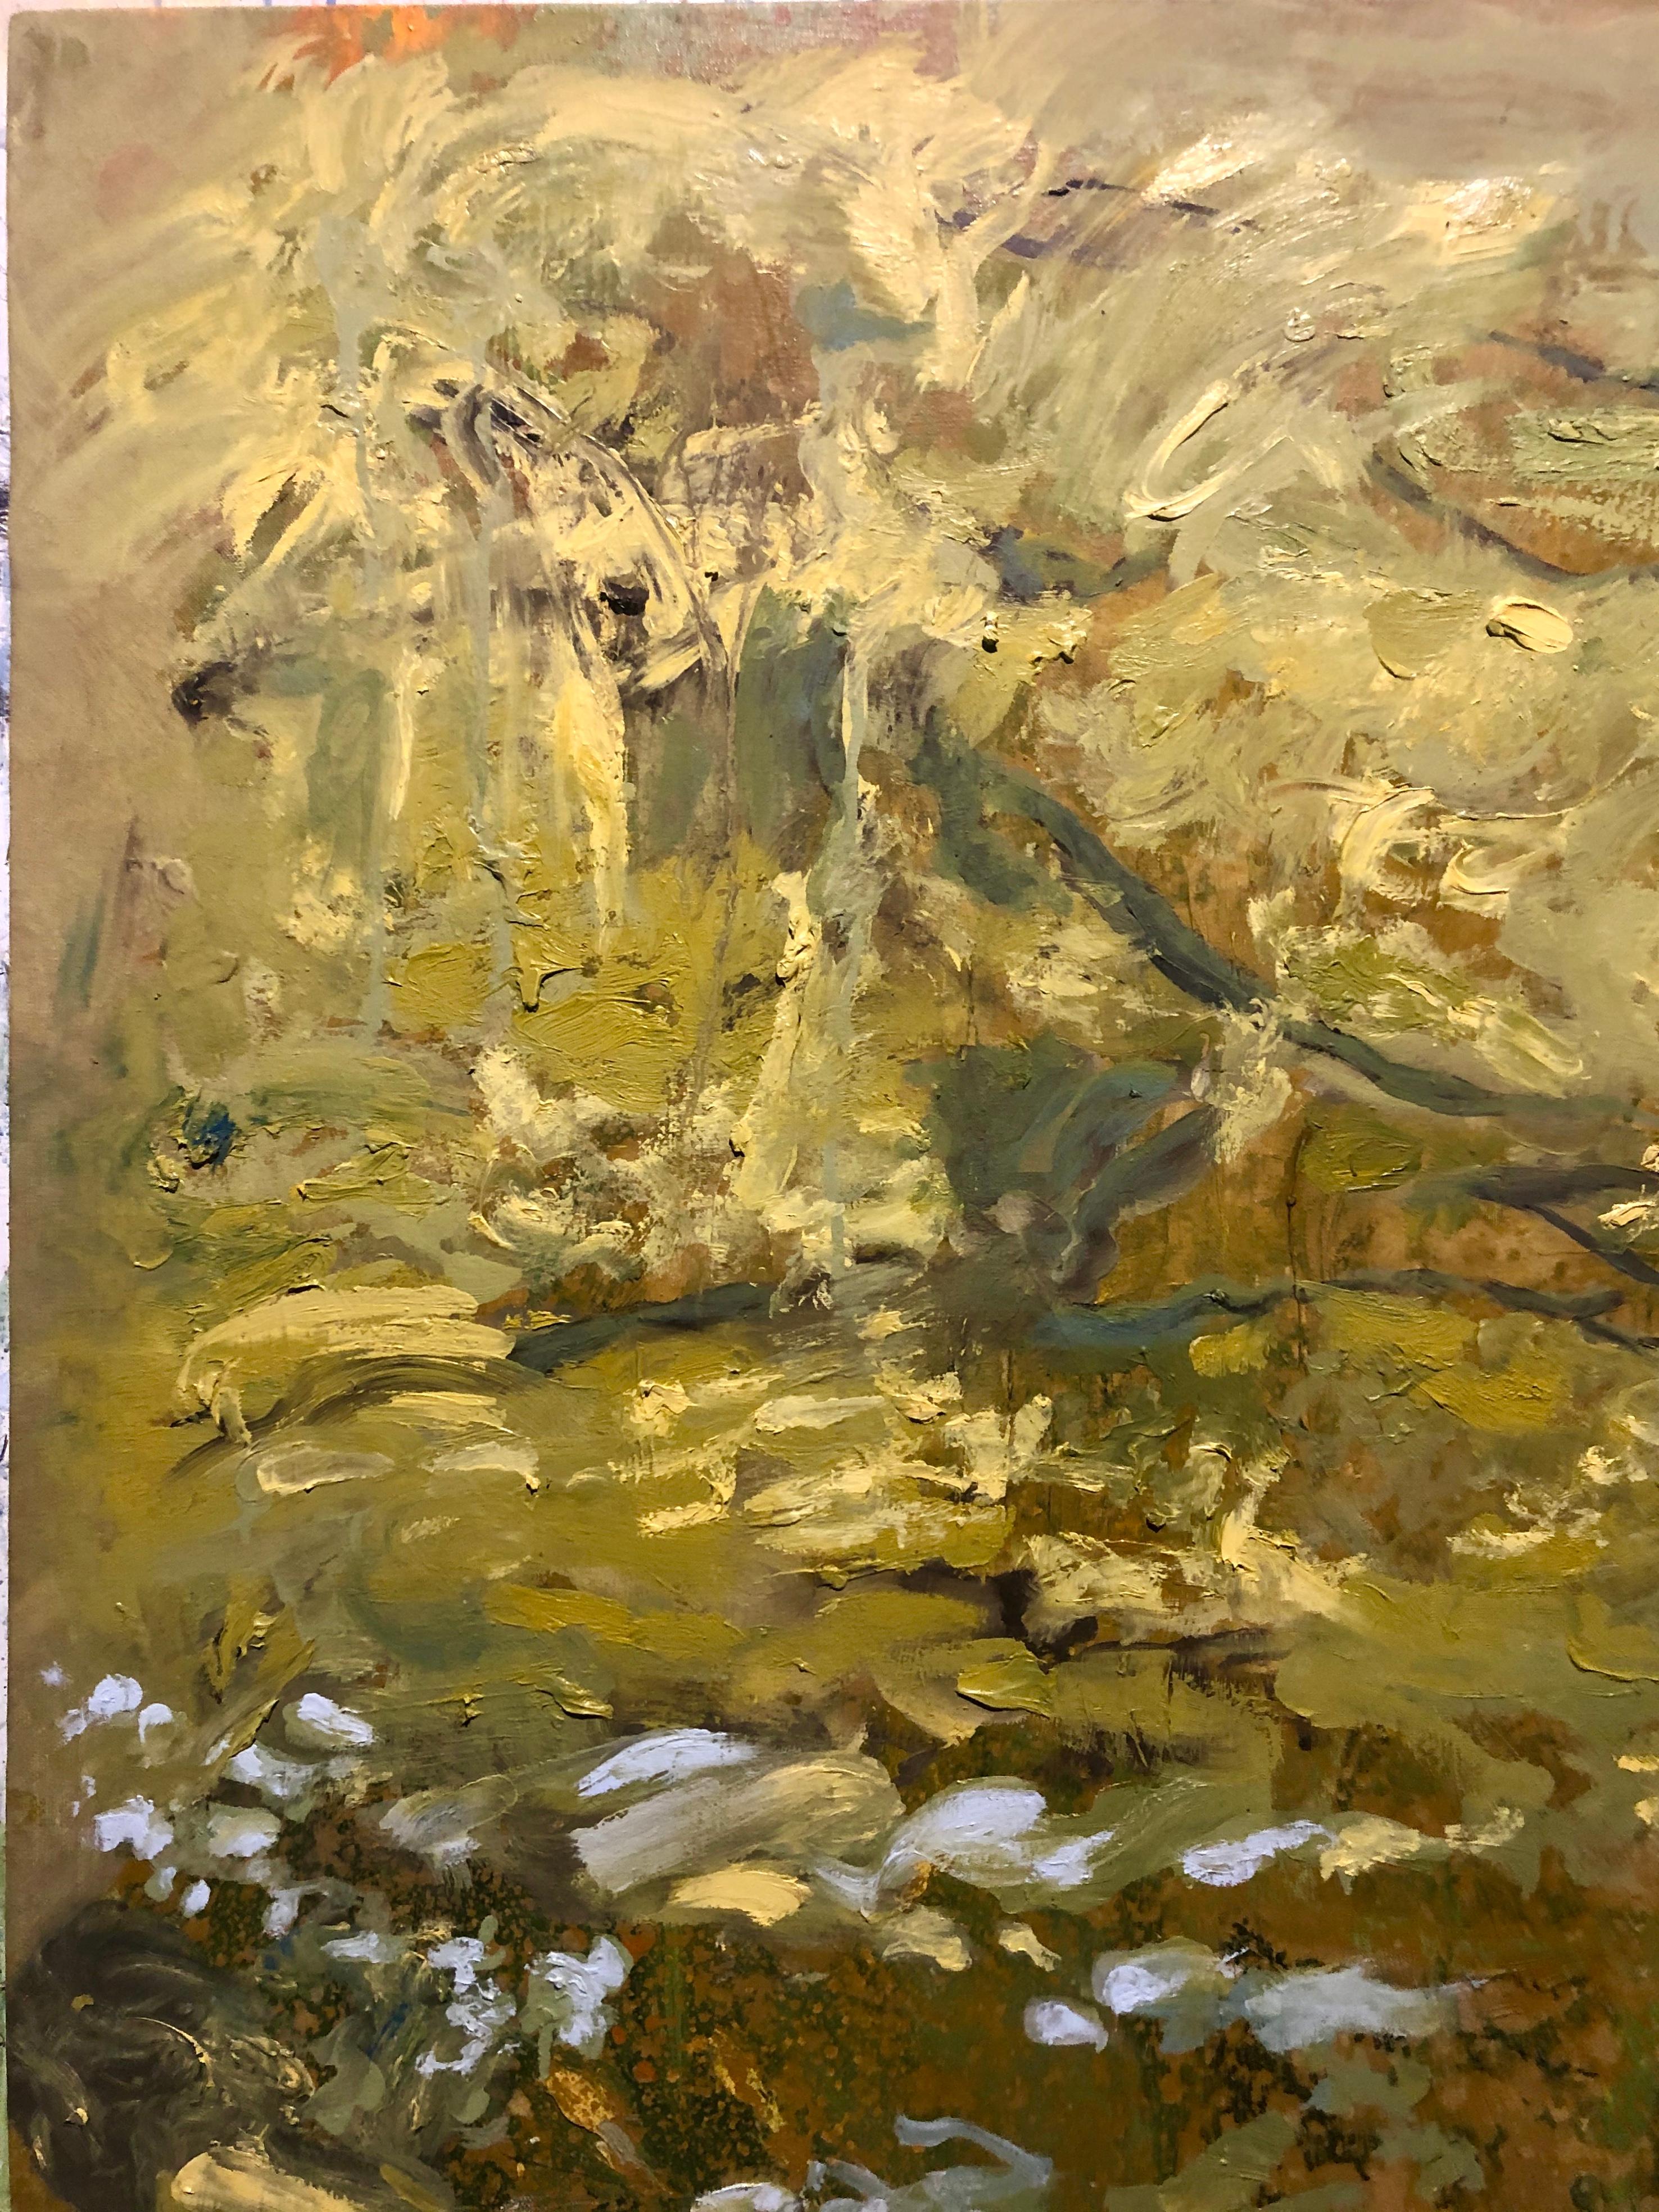 “Puerto Viejo”, 2018, Canvas, Oil Paint  - Brown Landscape Painting by Guillermo Conte